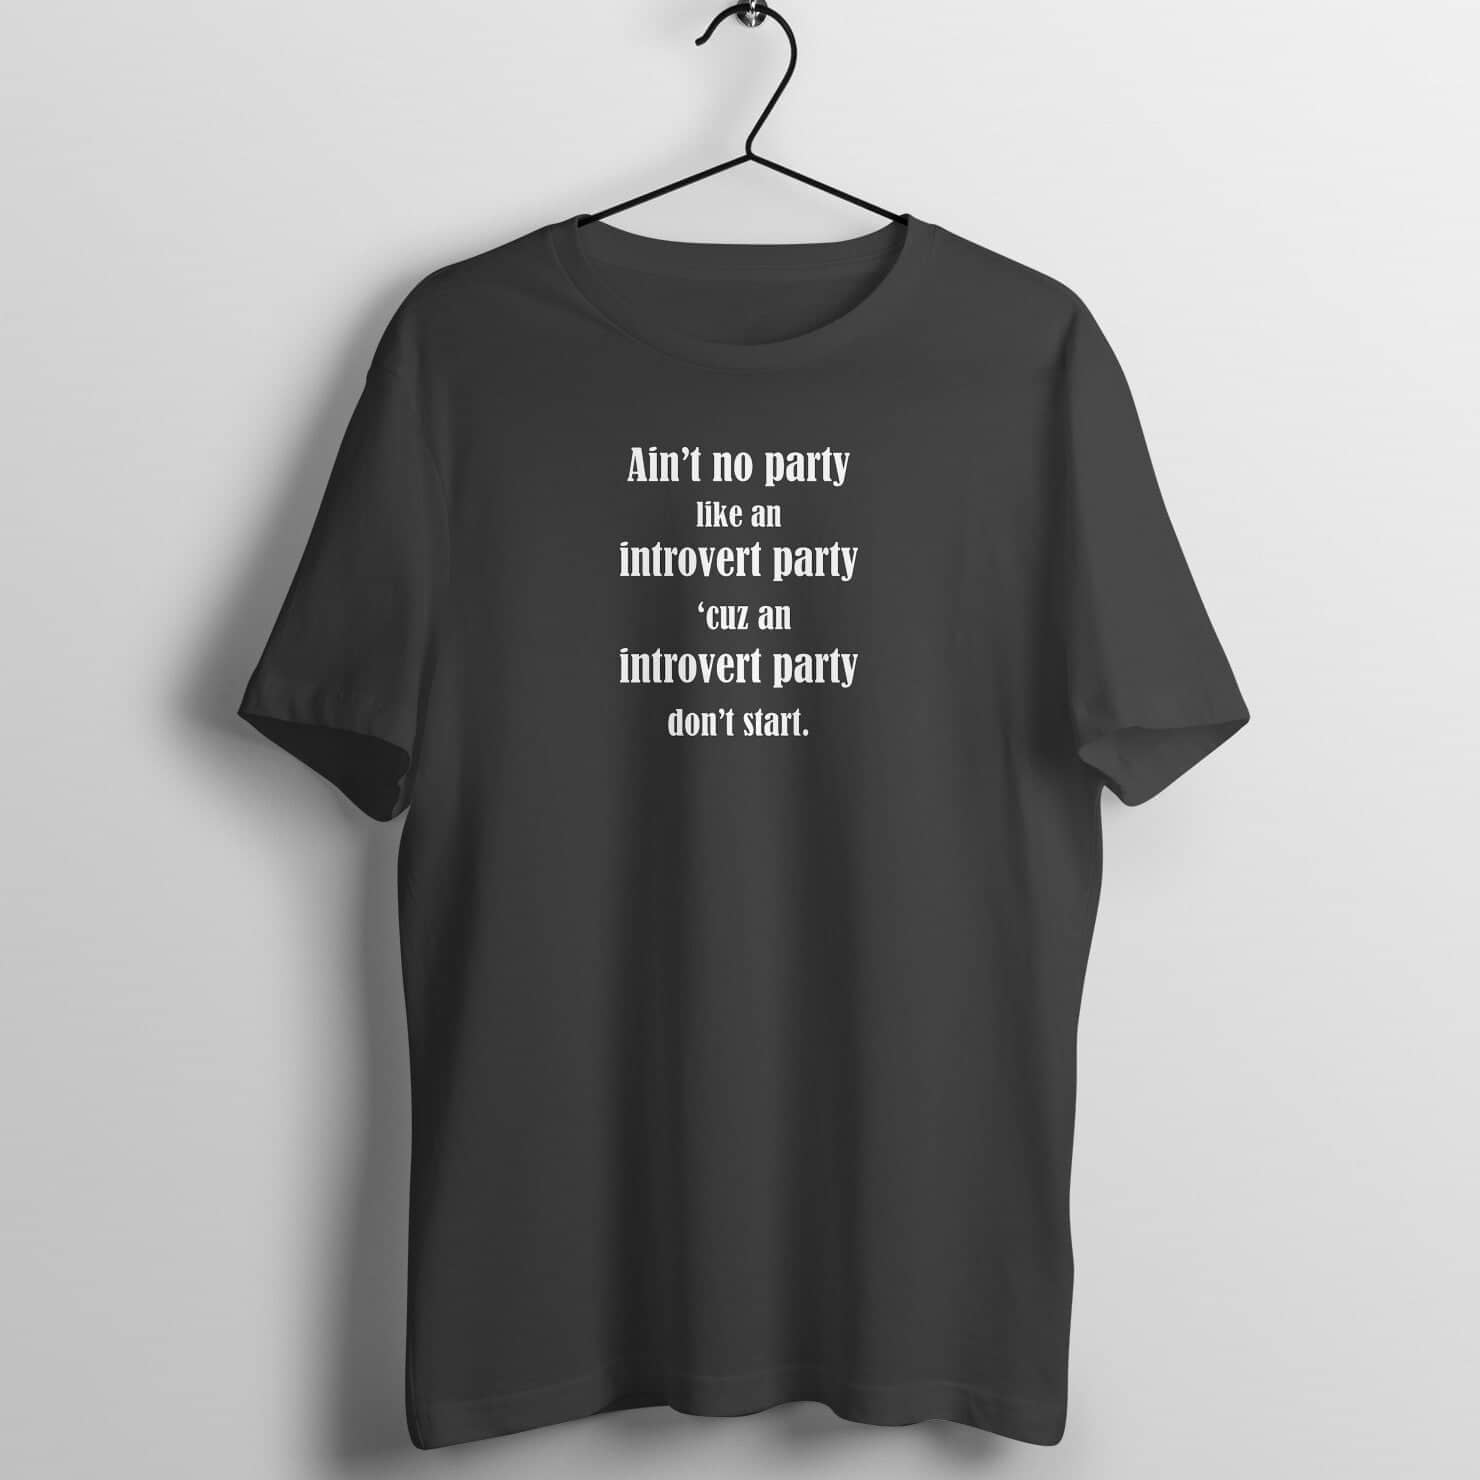 Ain't no Party Like the Introvert Party Cuz it Don't Start Funny Black T Shirt for Men and Women freeshipping - Catch My Drift India